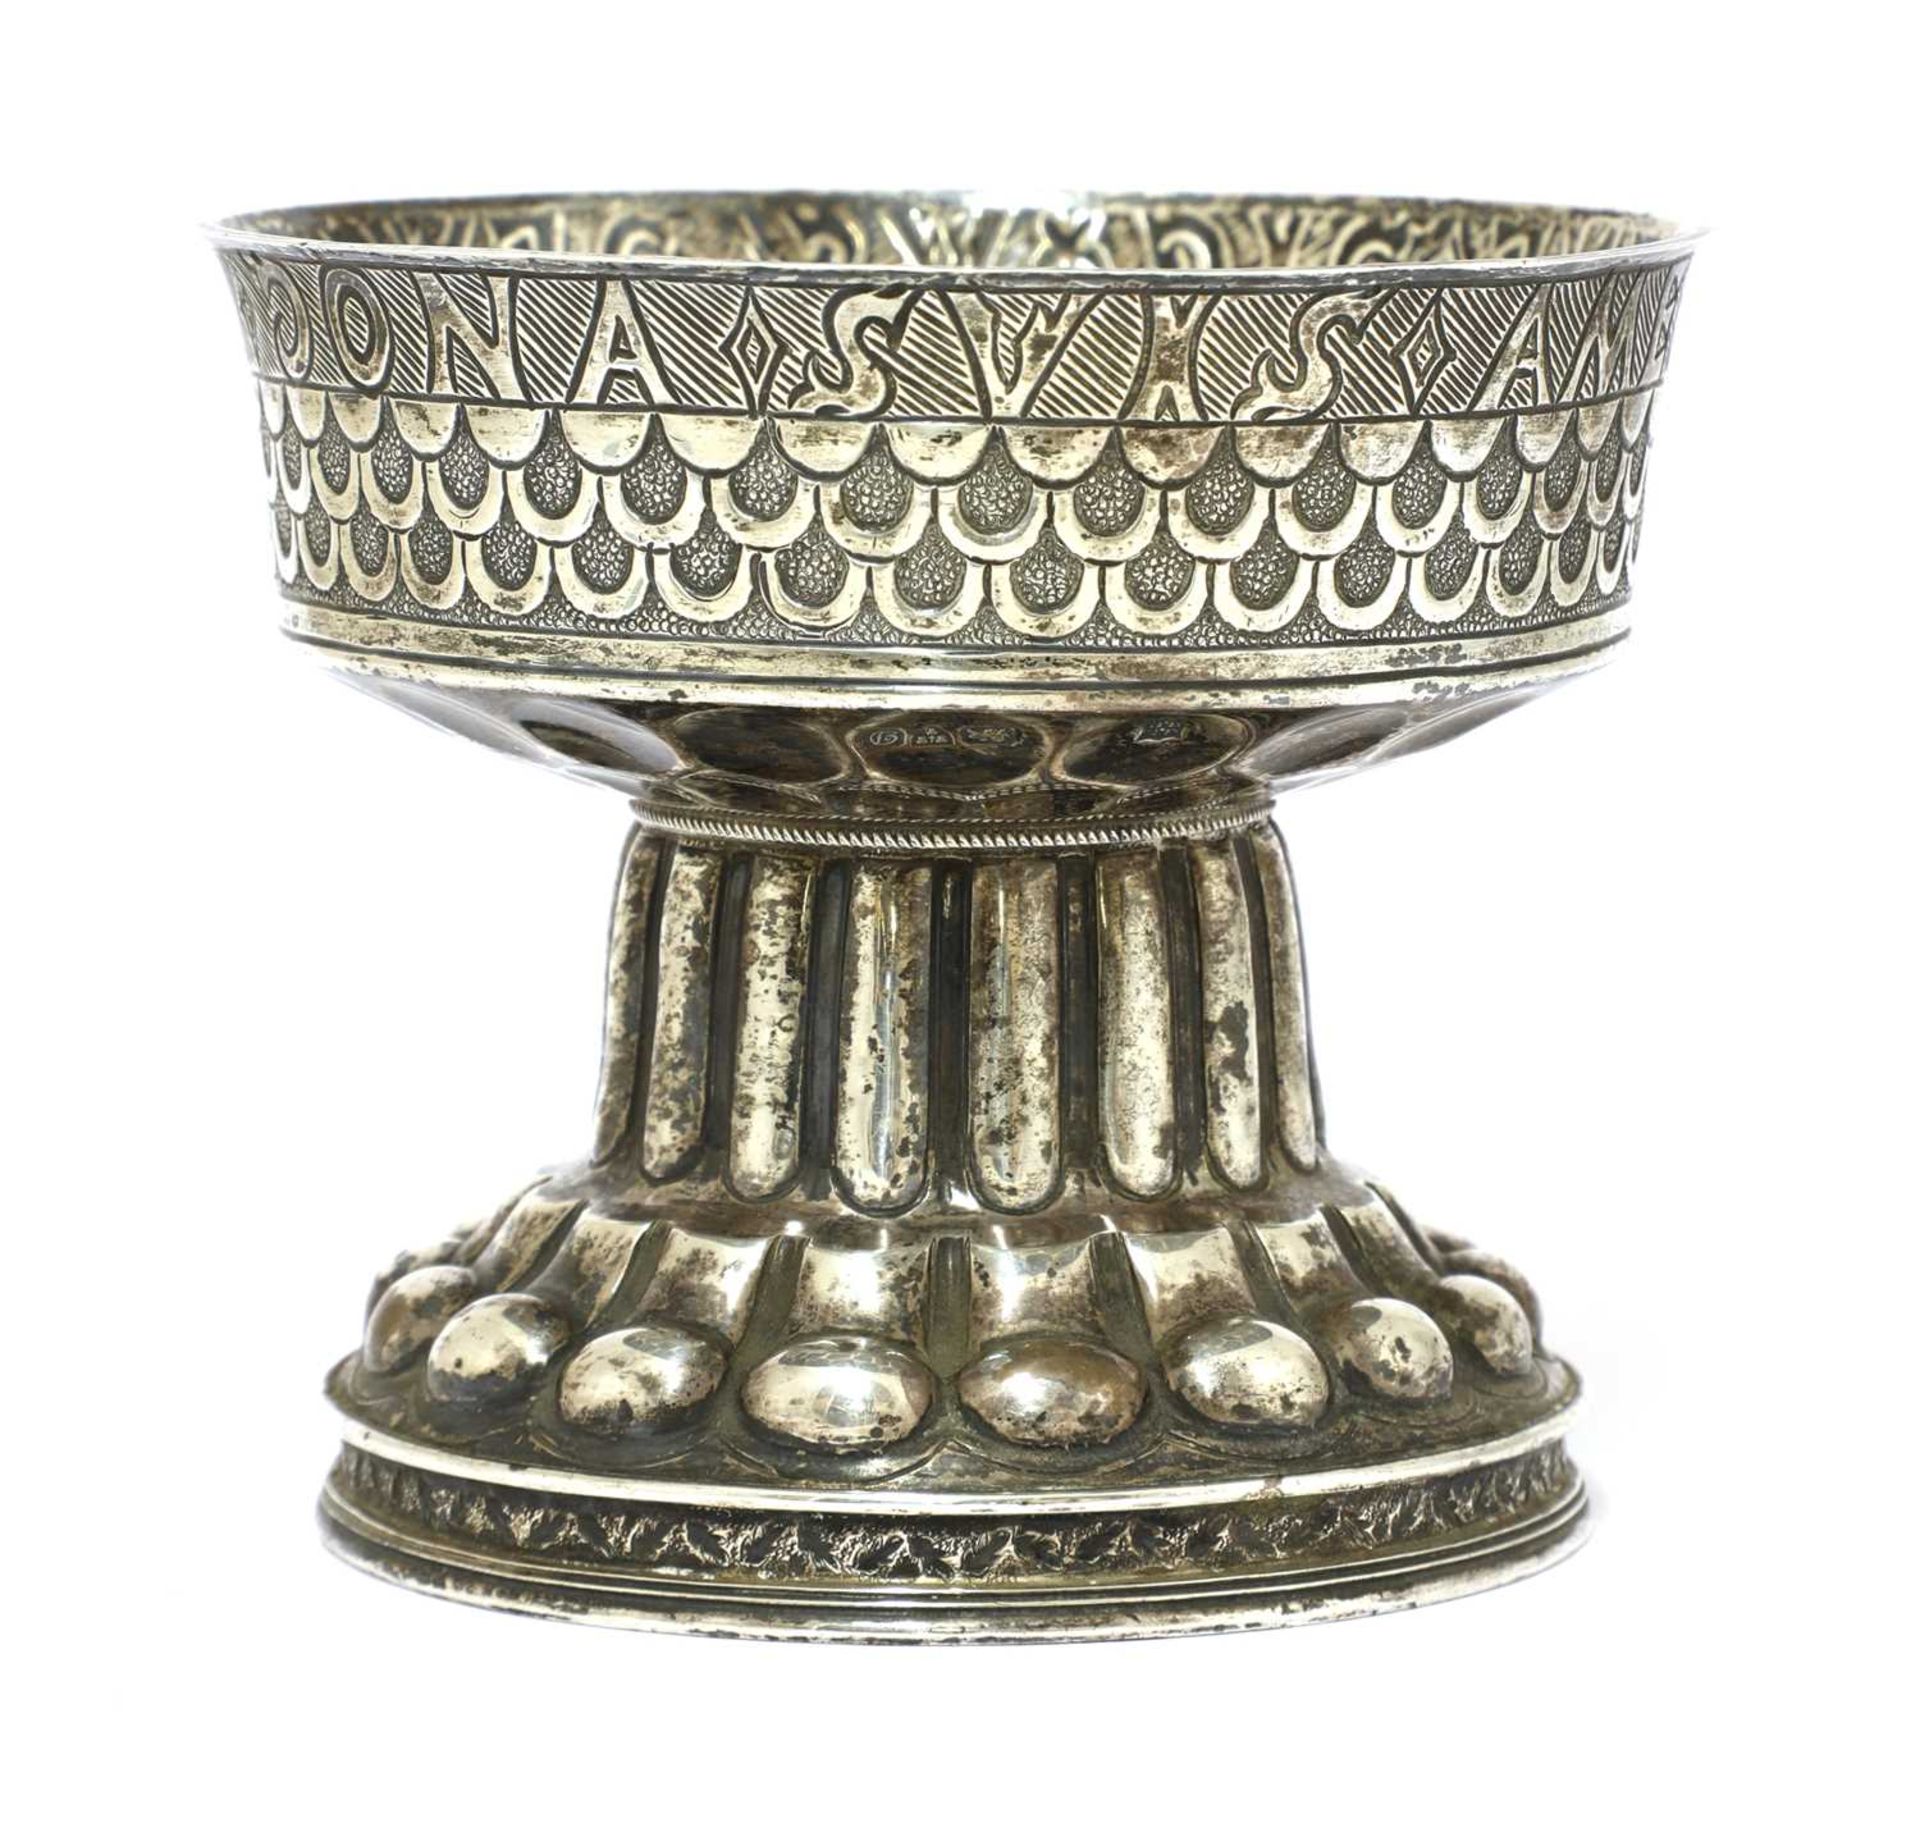 A silver gilt reproduction replica of The Tudor (Holms) Cup, - Image 2 of 3